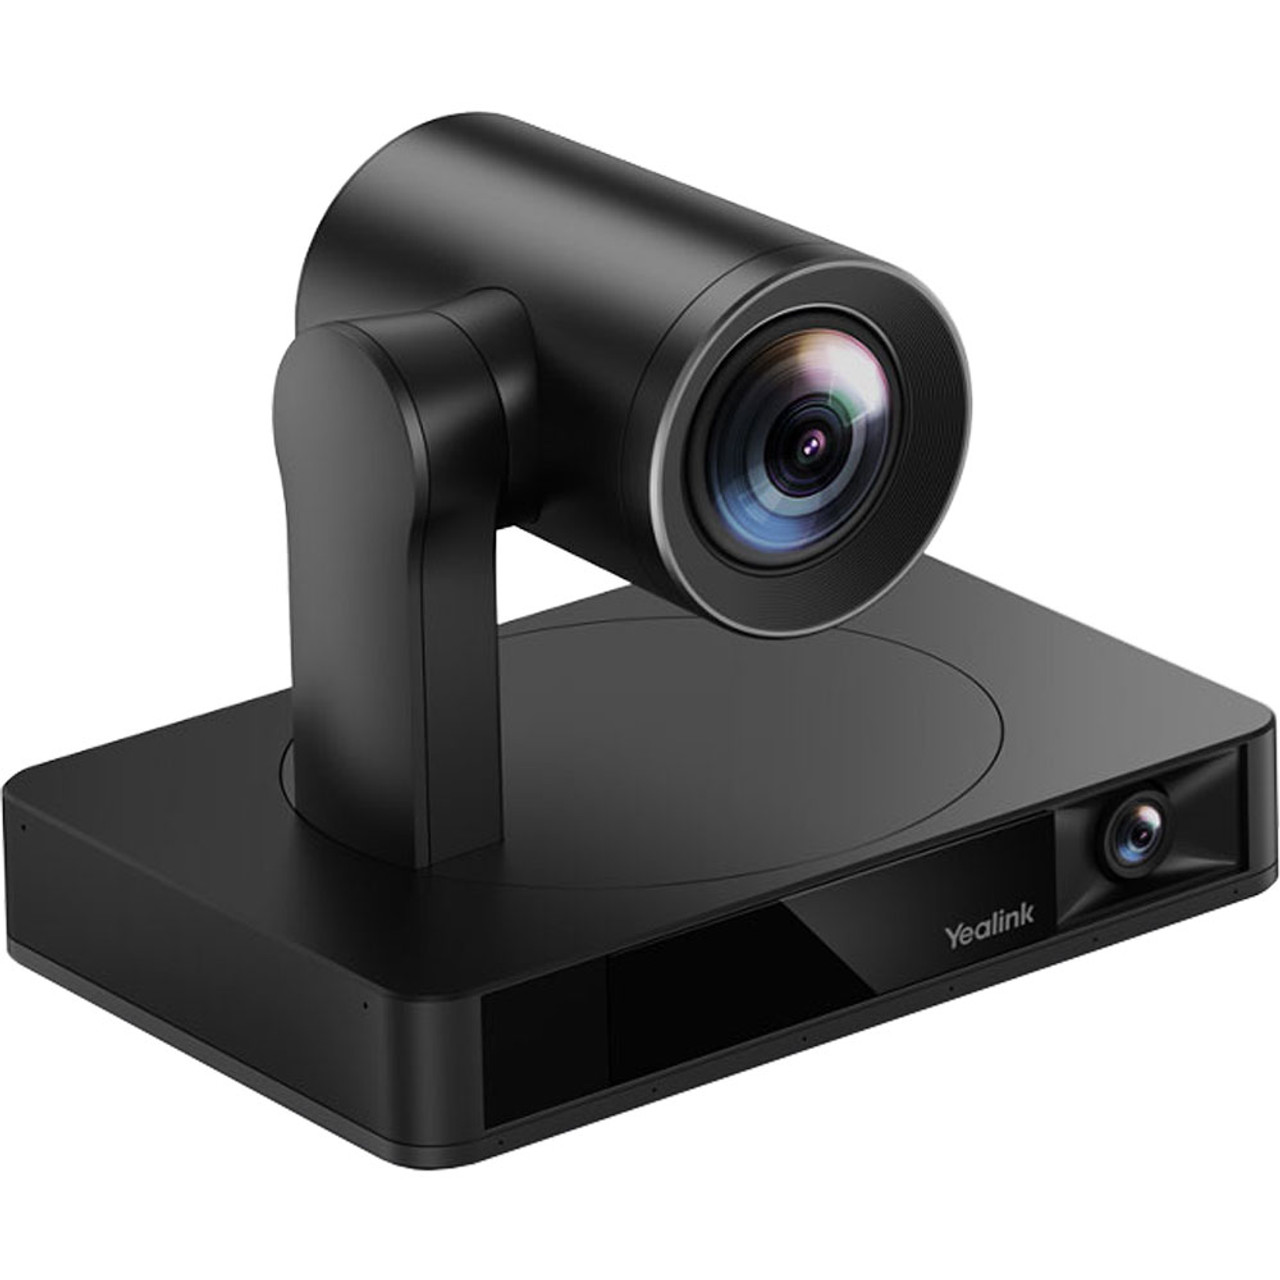 Black UVC86 4K Dual-Eye Intelligent Camera with USB Port, includes VCR20 Remote Control, 7m USB Cable, 7m Network Cable, Wall Mount Bracket and Power